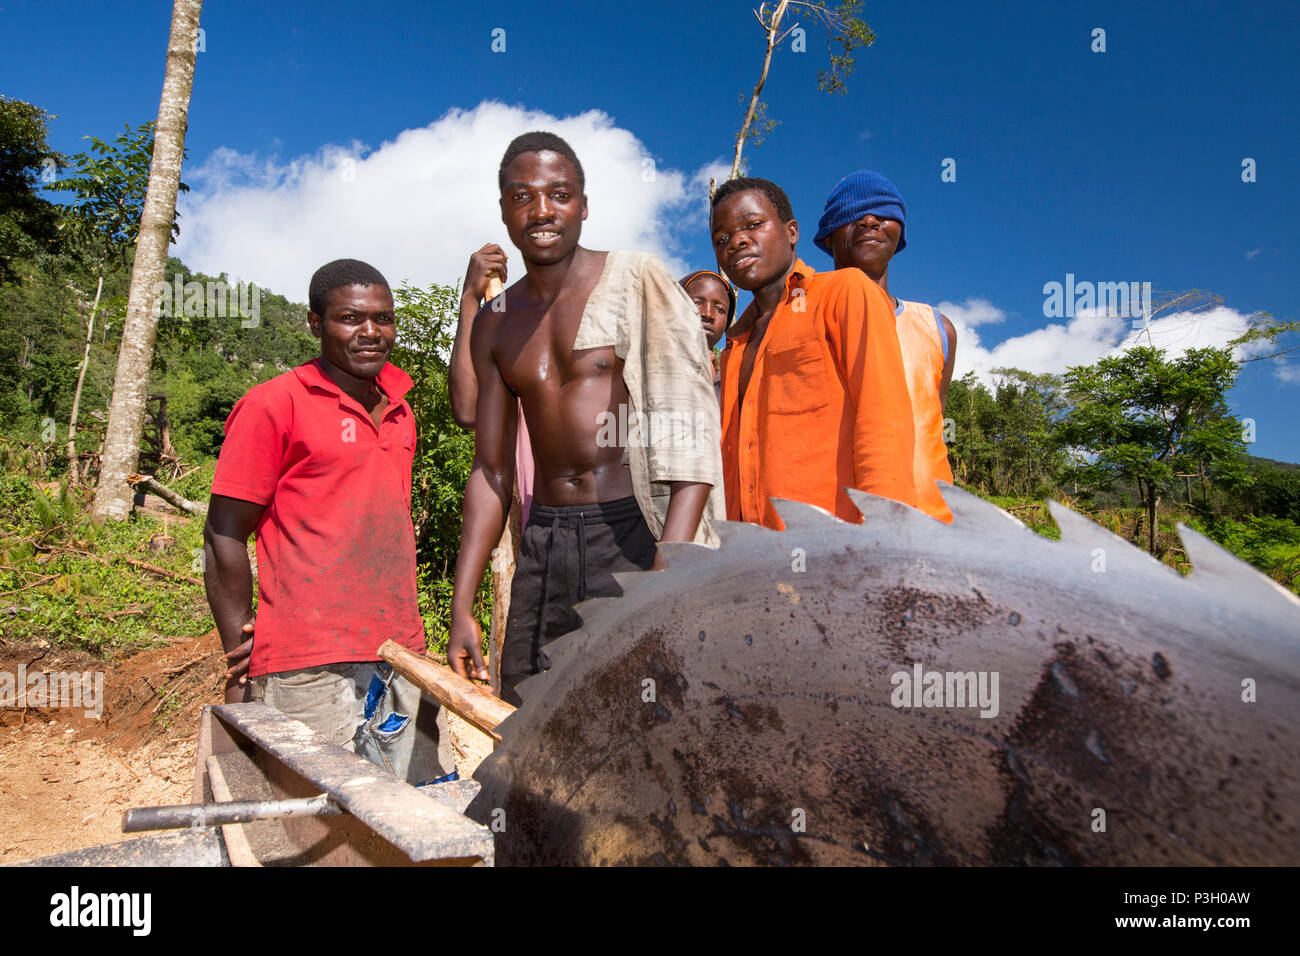 Portrait of Malawi men at logging camp with table saw, Zomba Plateau, Malawi Stock Photo